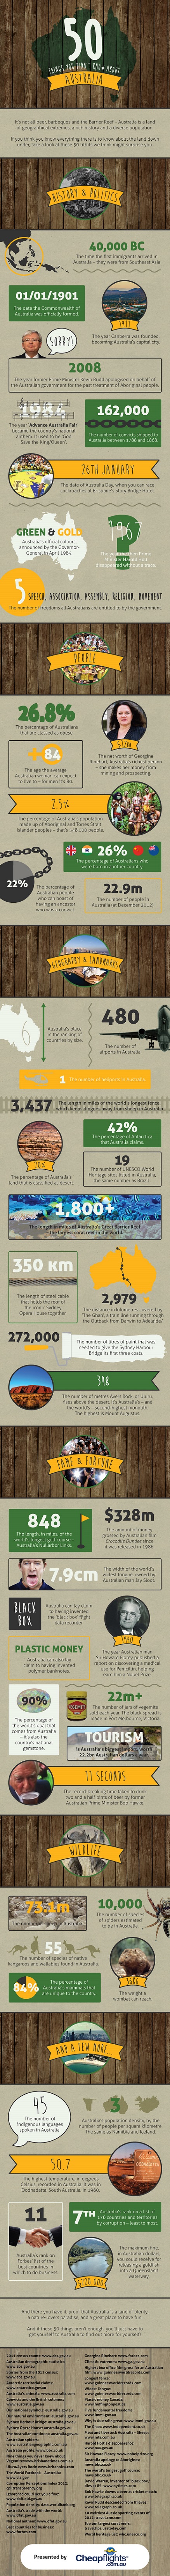 50 Things You Didn’t Know About Australia Infographic